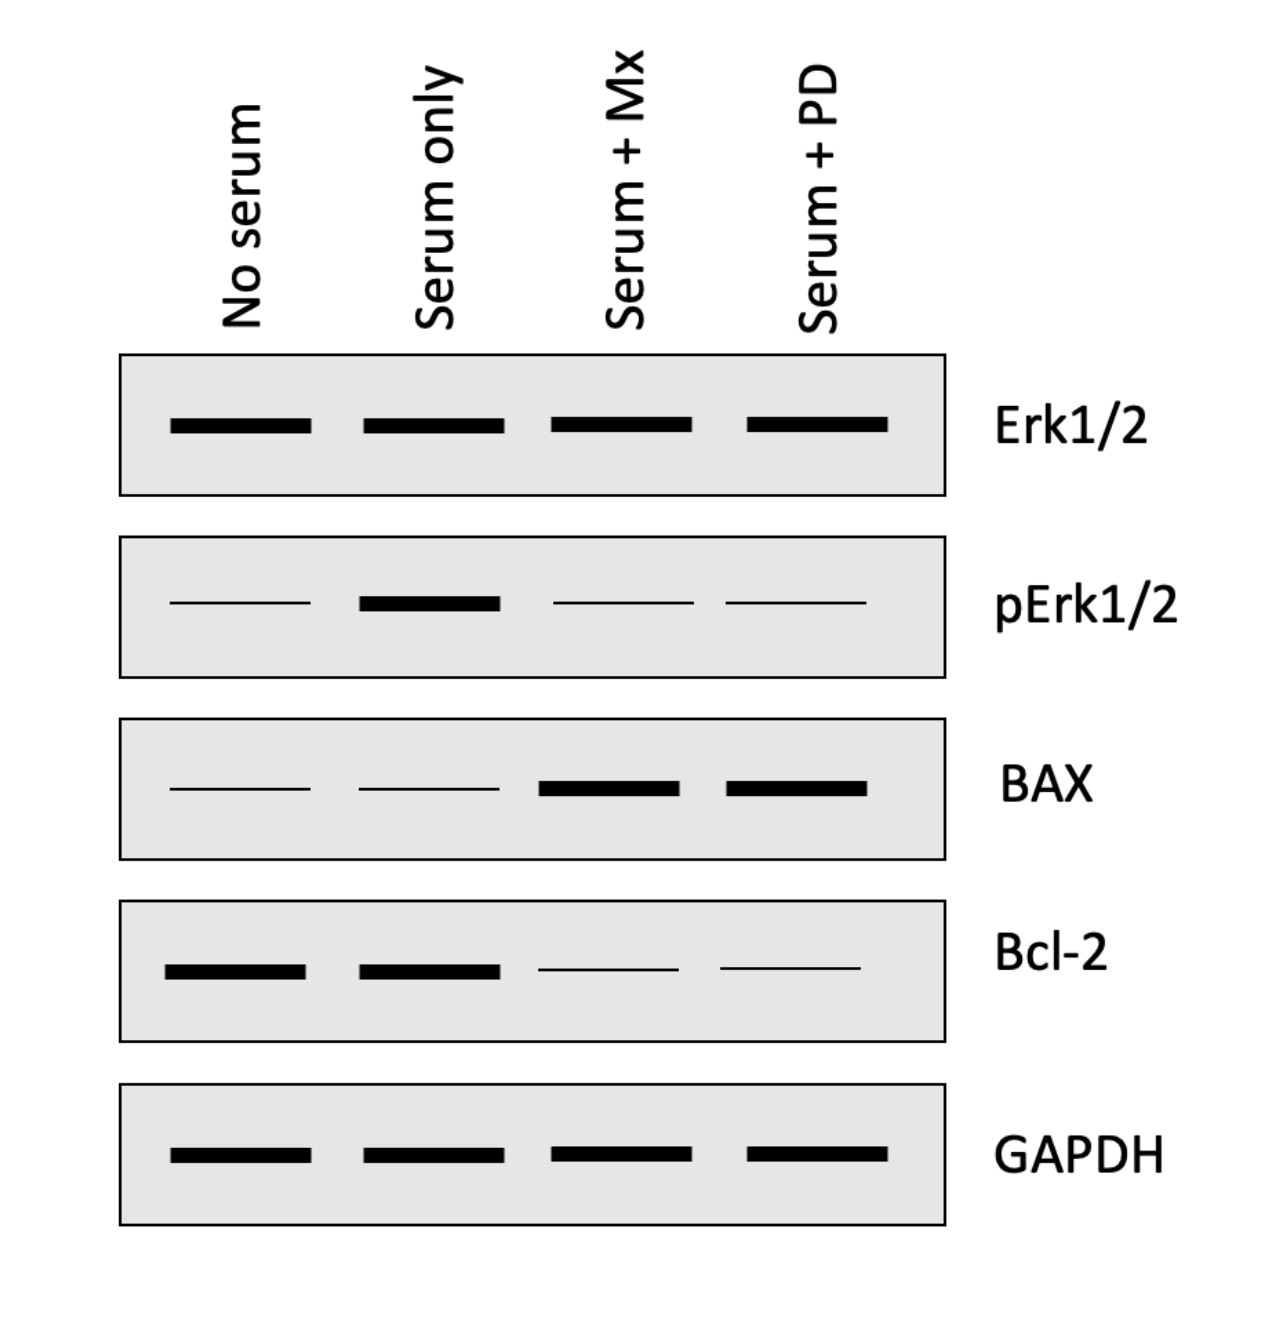 <p>The following four questions refer to the Western blot below that investigated how a chemotherapeutic drug methotrexate (Mx) impacts the activation of the ERK1/2 and apoptosis pathways in HeLa cells (malignant cervical cancer cells).  Cells were either serum starved (no serum) or grown in serum containing media with or without PD184352 (PD; ERK1/2 inhibitor) or Mx.</p><p></p><p>What was the purpose of GAPDH in this experiment?</p><ol><li><p>Choice 1 of 4:GAPDH is phosphorylated by ERK1/2</p></li><li><p>Choice 2 of 4:Neither option is correct.</p></li><li><p>Choice 3 of 4:Both options are correct</p></li><li><p>Choice 4 of 4:GAPDH is degraded during apoptosis</p></li></ol>